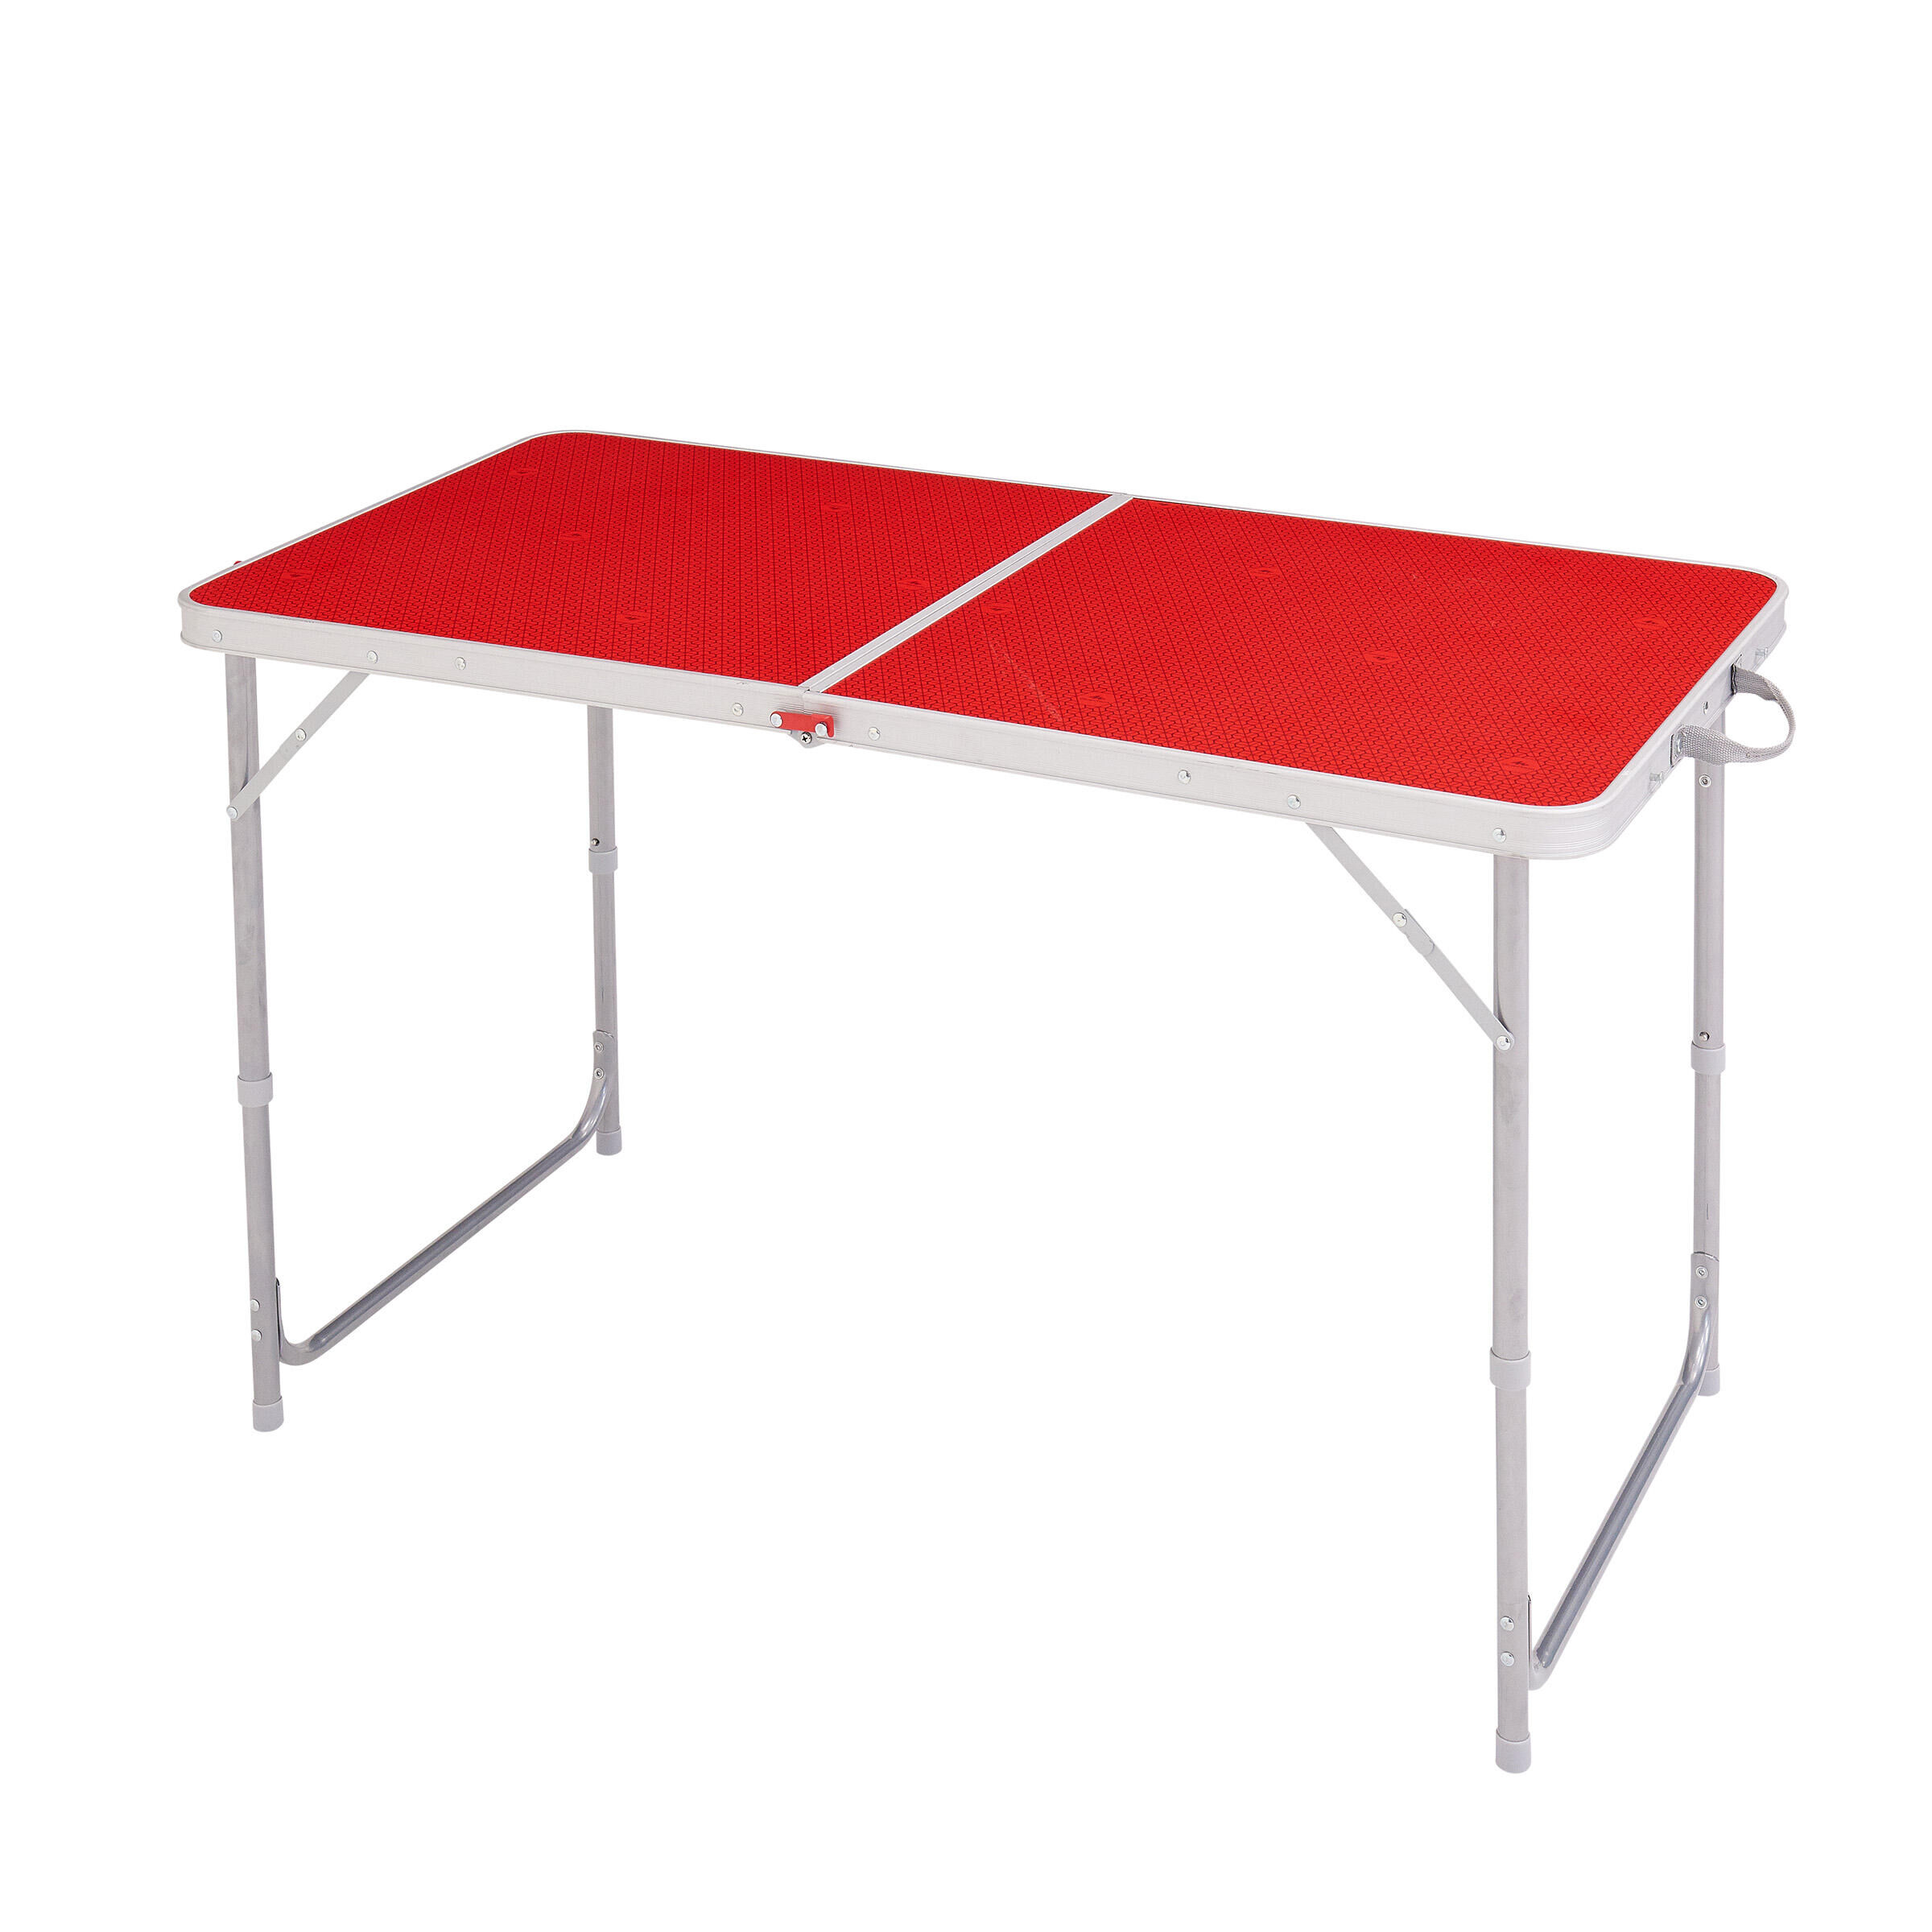 QUECHUA FOLDING CAMPING TABLE FOR 4 TO 6 PEOPLE